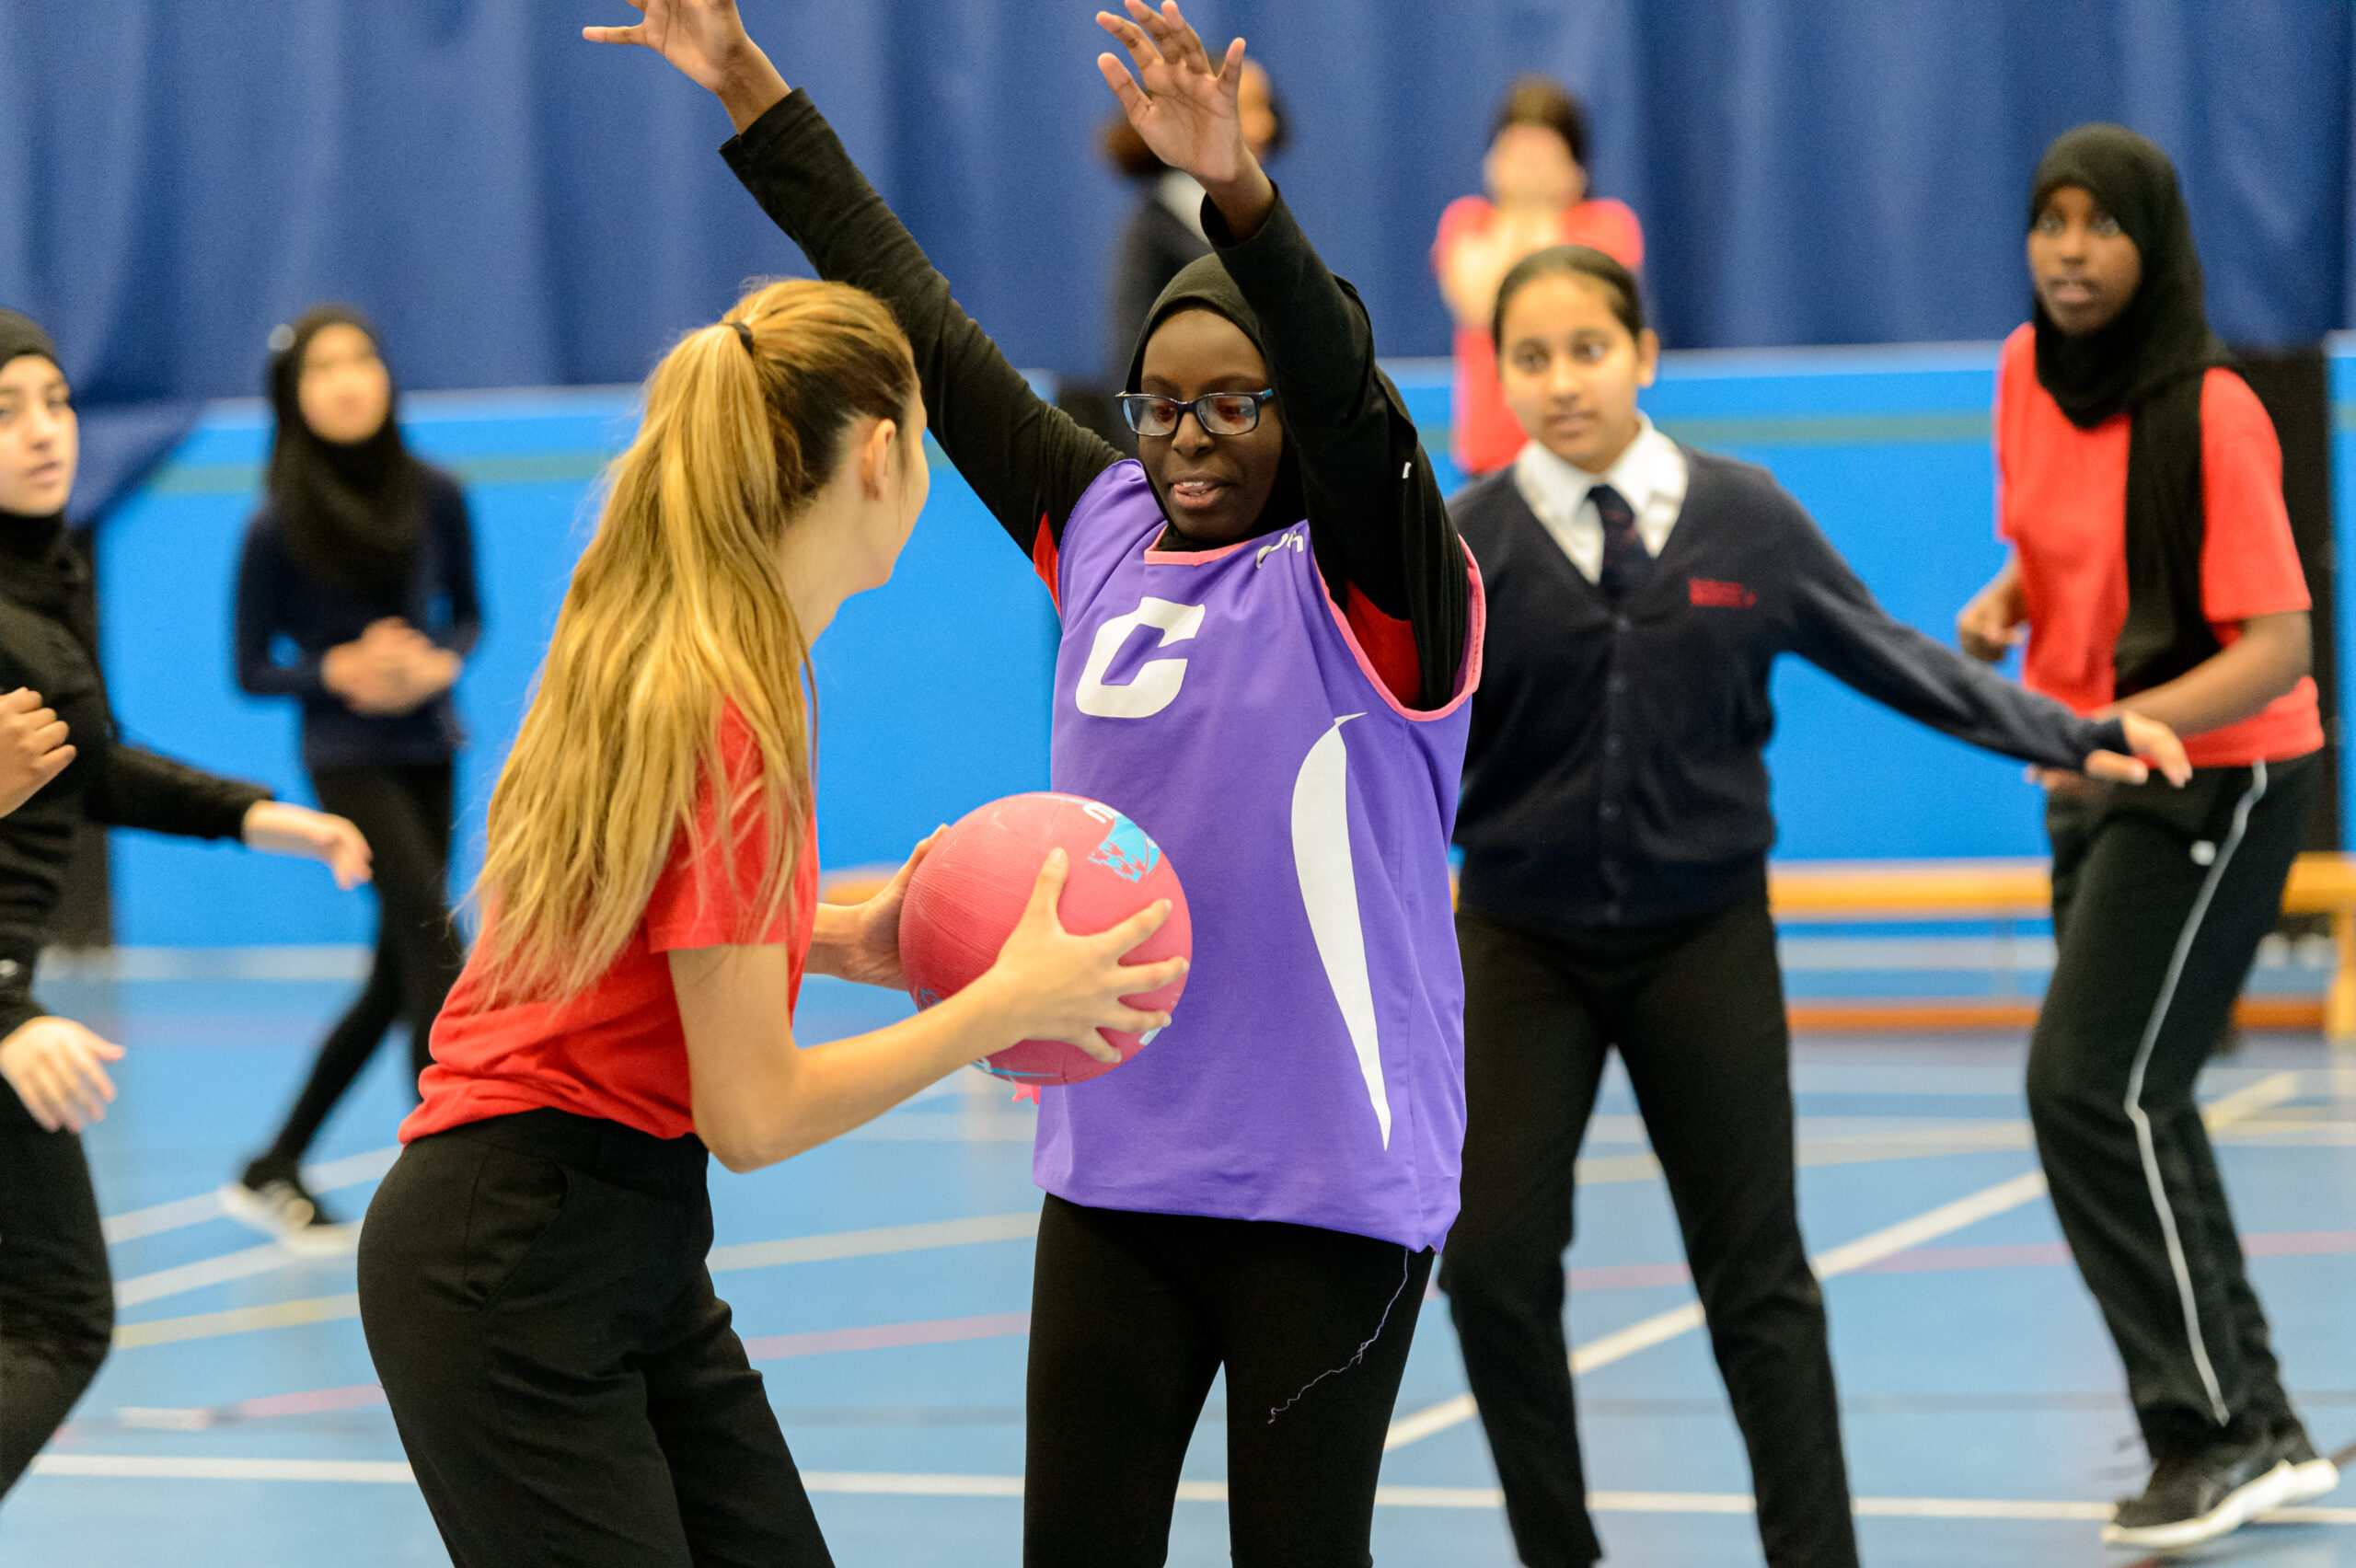 Physical Literacy Consensus Statement for England published